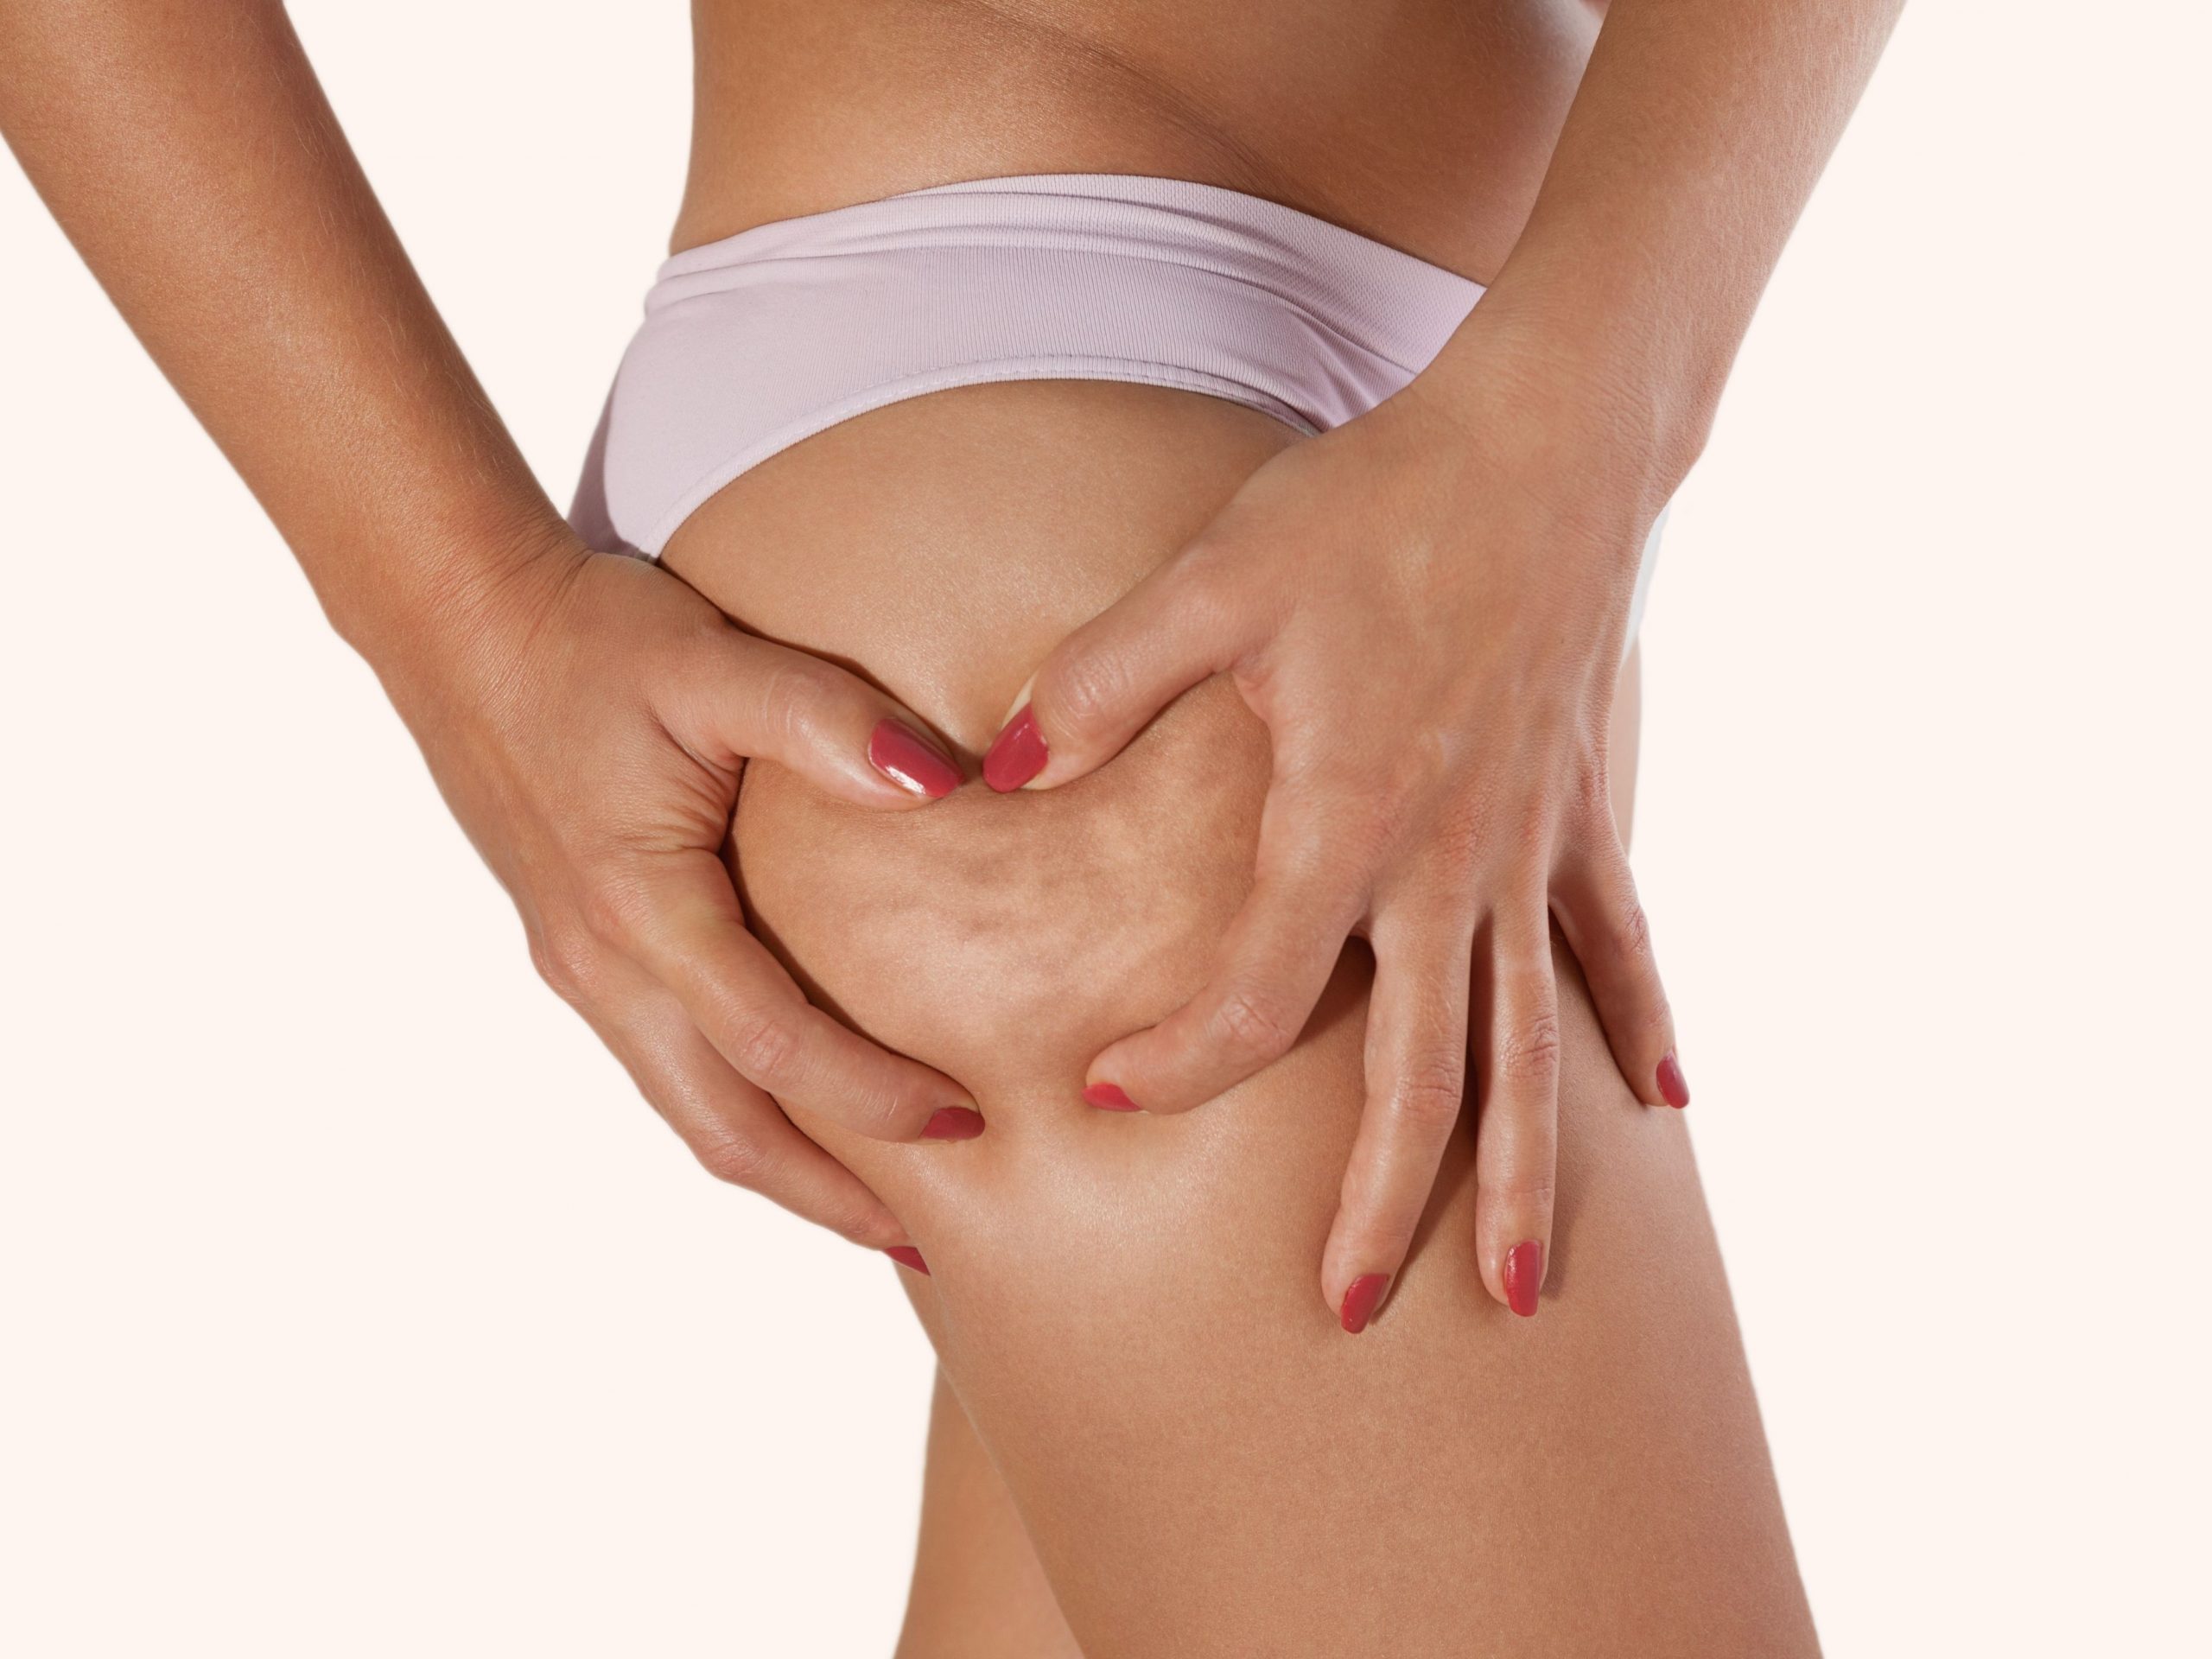 Tips to treat cellulite at home